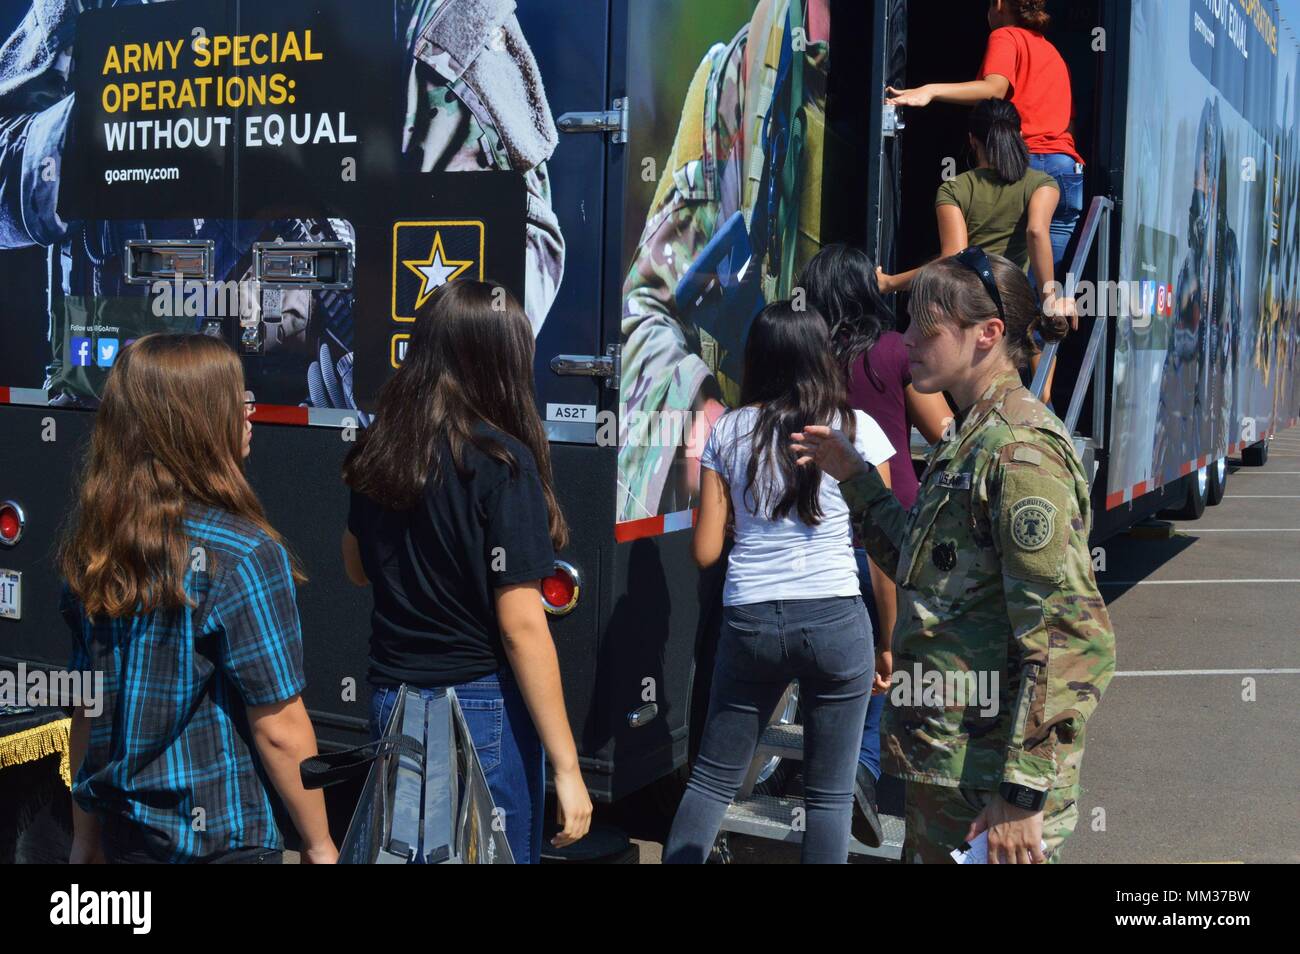 Staff Sgt. Jennifer Kirim (right), center leader, Black Canyon Recruiting Center, guides students from Moon Valley High School into an interactive Special Operations Semi (AS2) tractor-trailer, Sept. 5, Moon Valley High School, Phoenix. The event was hosted by recruiters from Phoenix North Recruiting Company, Phoenix Recruiting Battalion, who guided hundreds of students through the trailer, allowing them to witness and experience aspects of the Special Operations world. The AS2 features a host of exhibits, including a Parachute Simulator, AH6 Little Bird Simulator, Weapons Display and a Ground Stock Photo